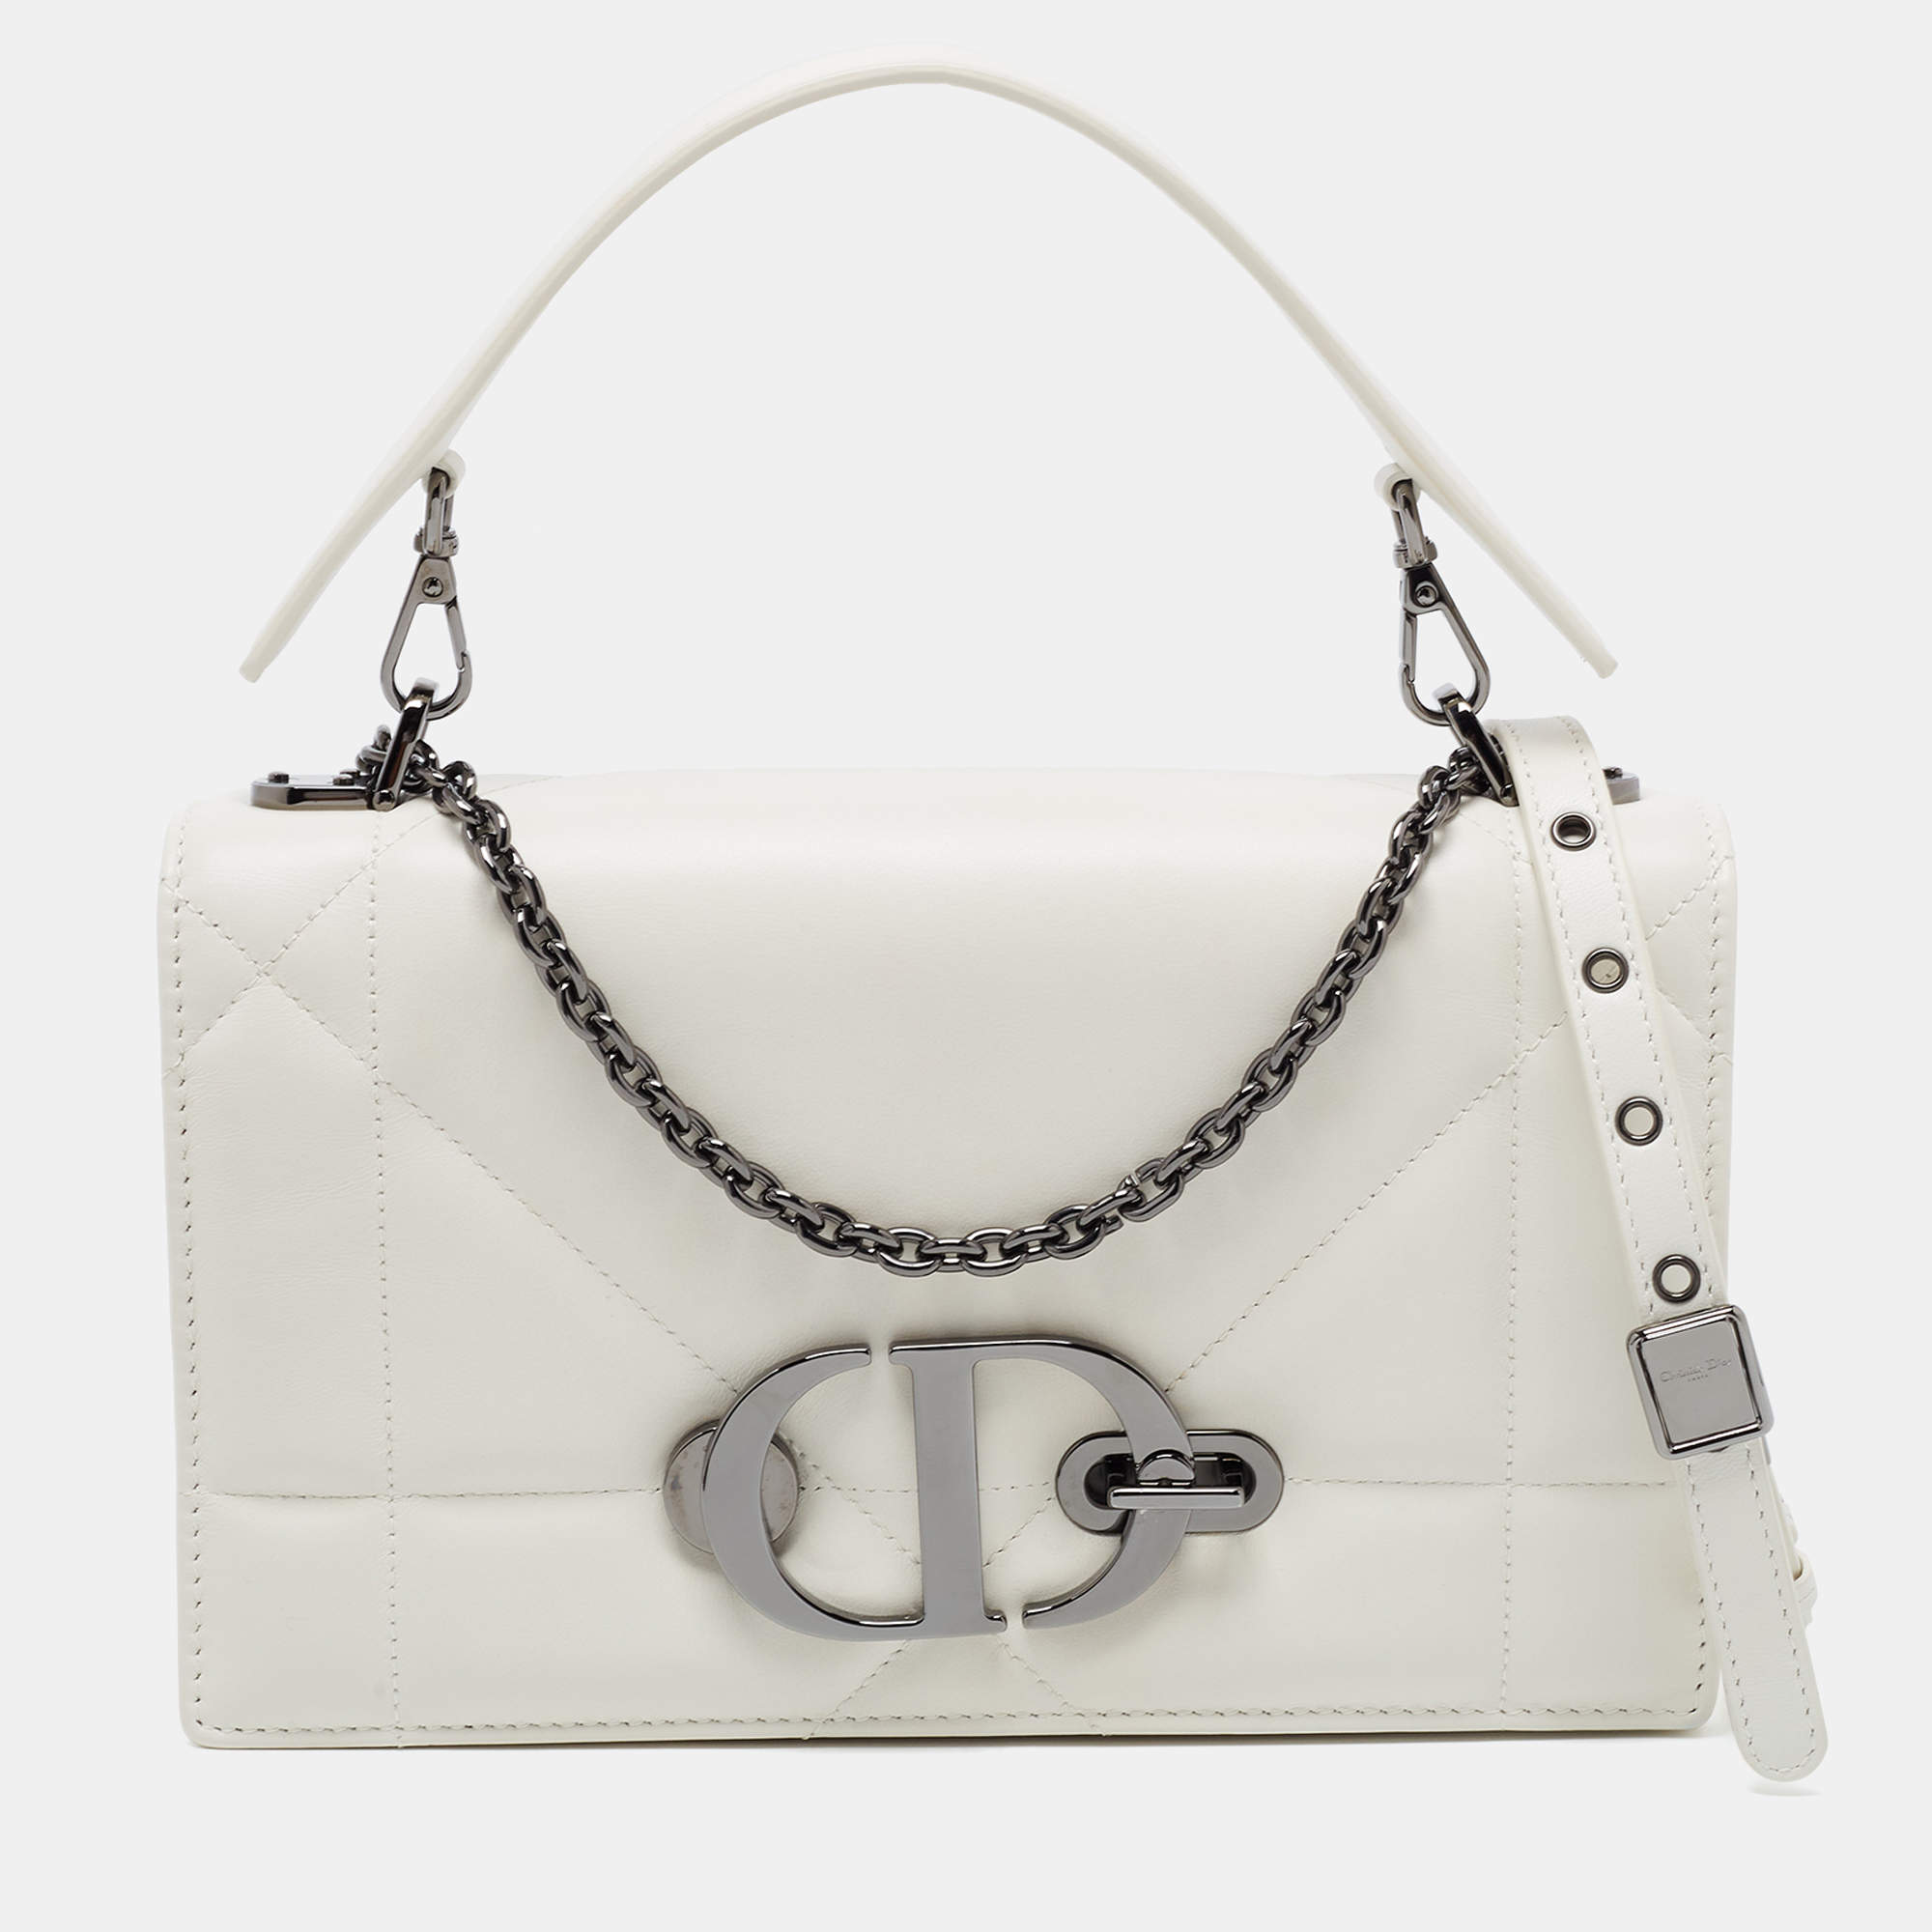 Dior Montaigne Off White. Made in Italy. With dustbag, box